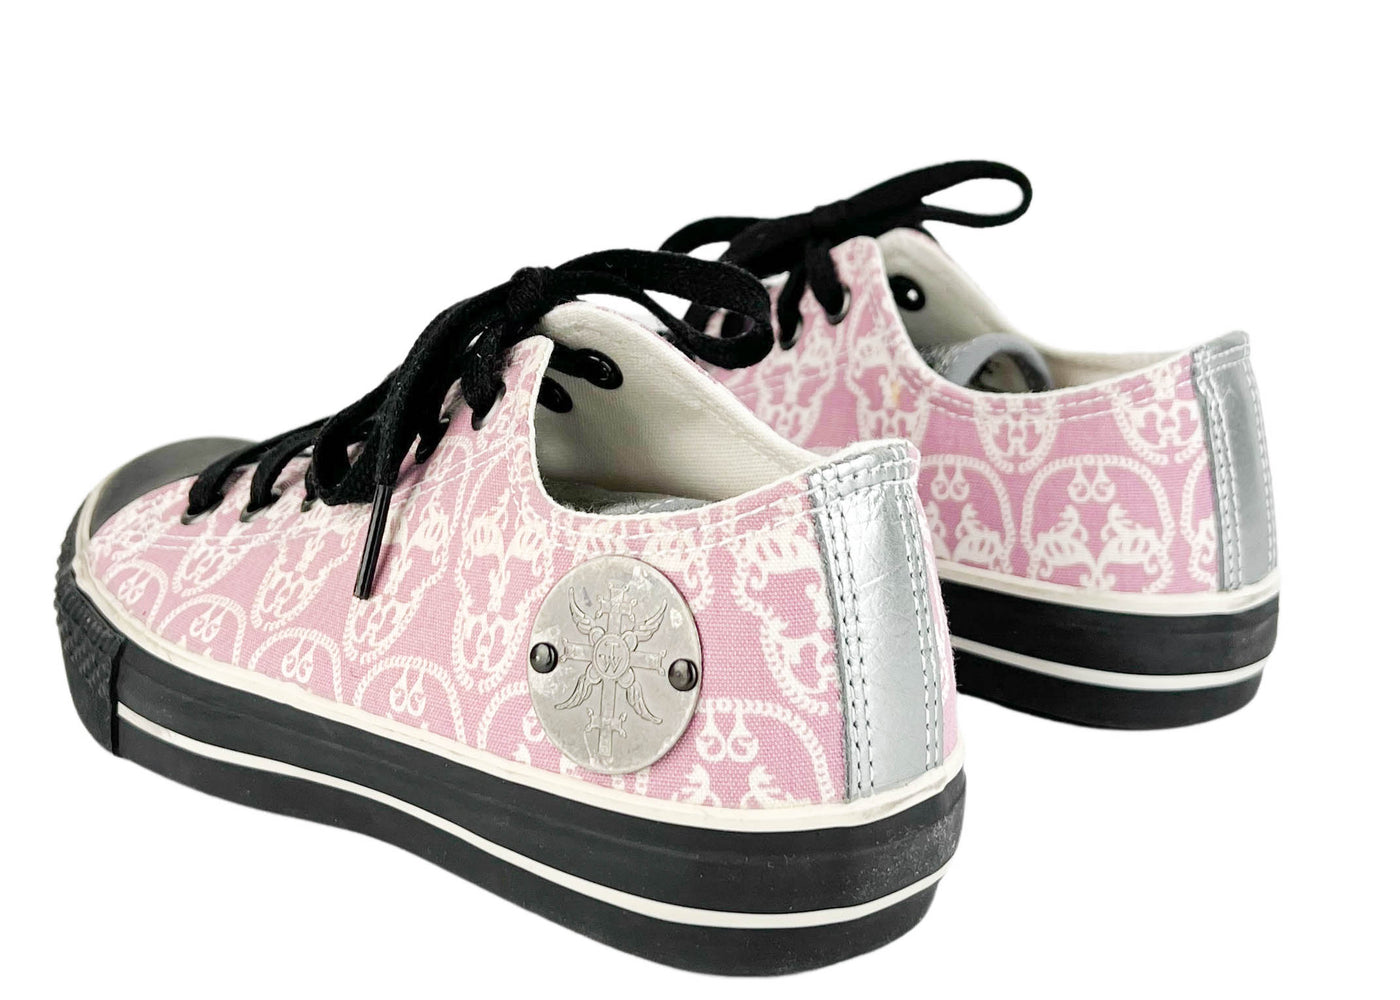 Thomas Wylde Dead Head Sneakers in Pink - Discounts on Thomas Wylde at UAL